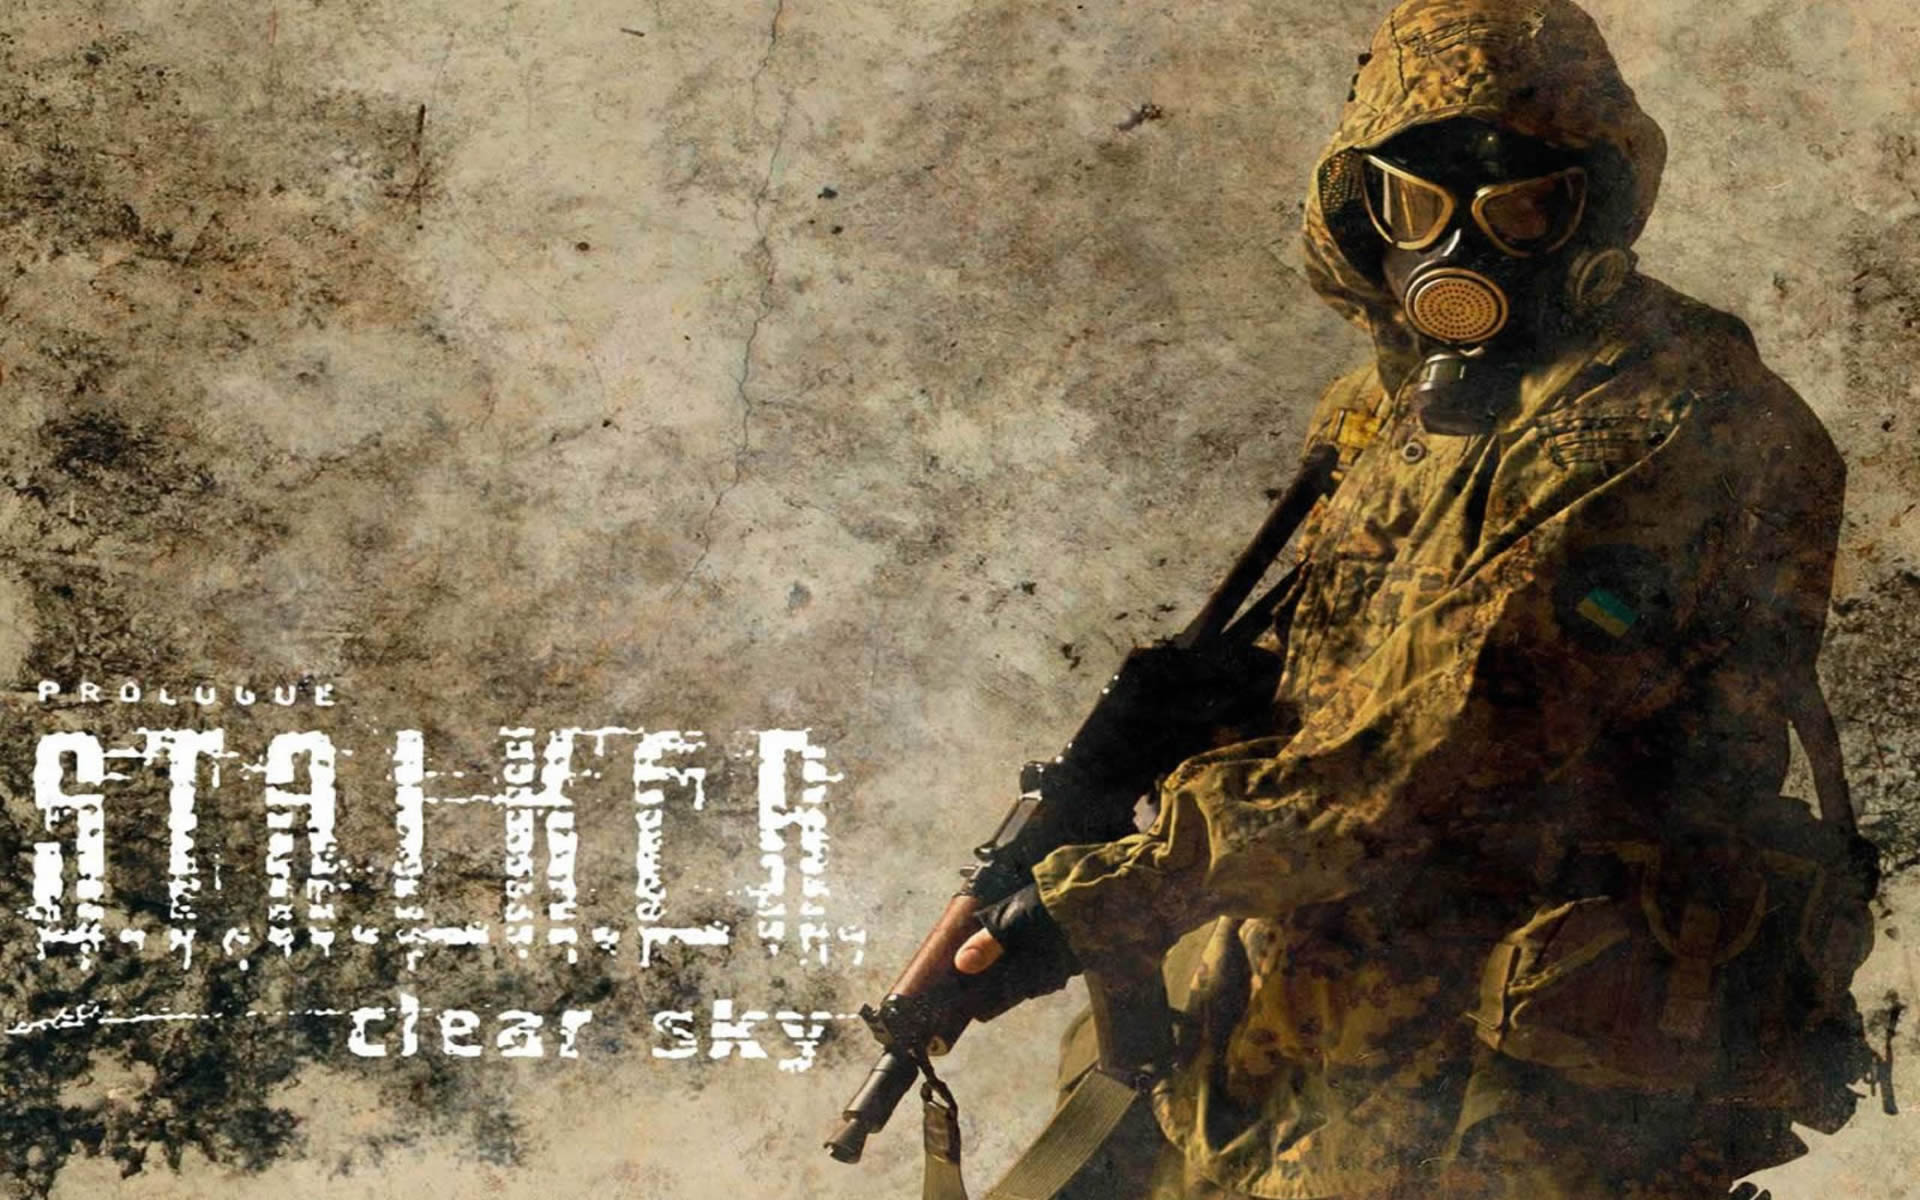 Stalker Action Rpg Games Wallpaper Image Featuring Clear Sky